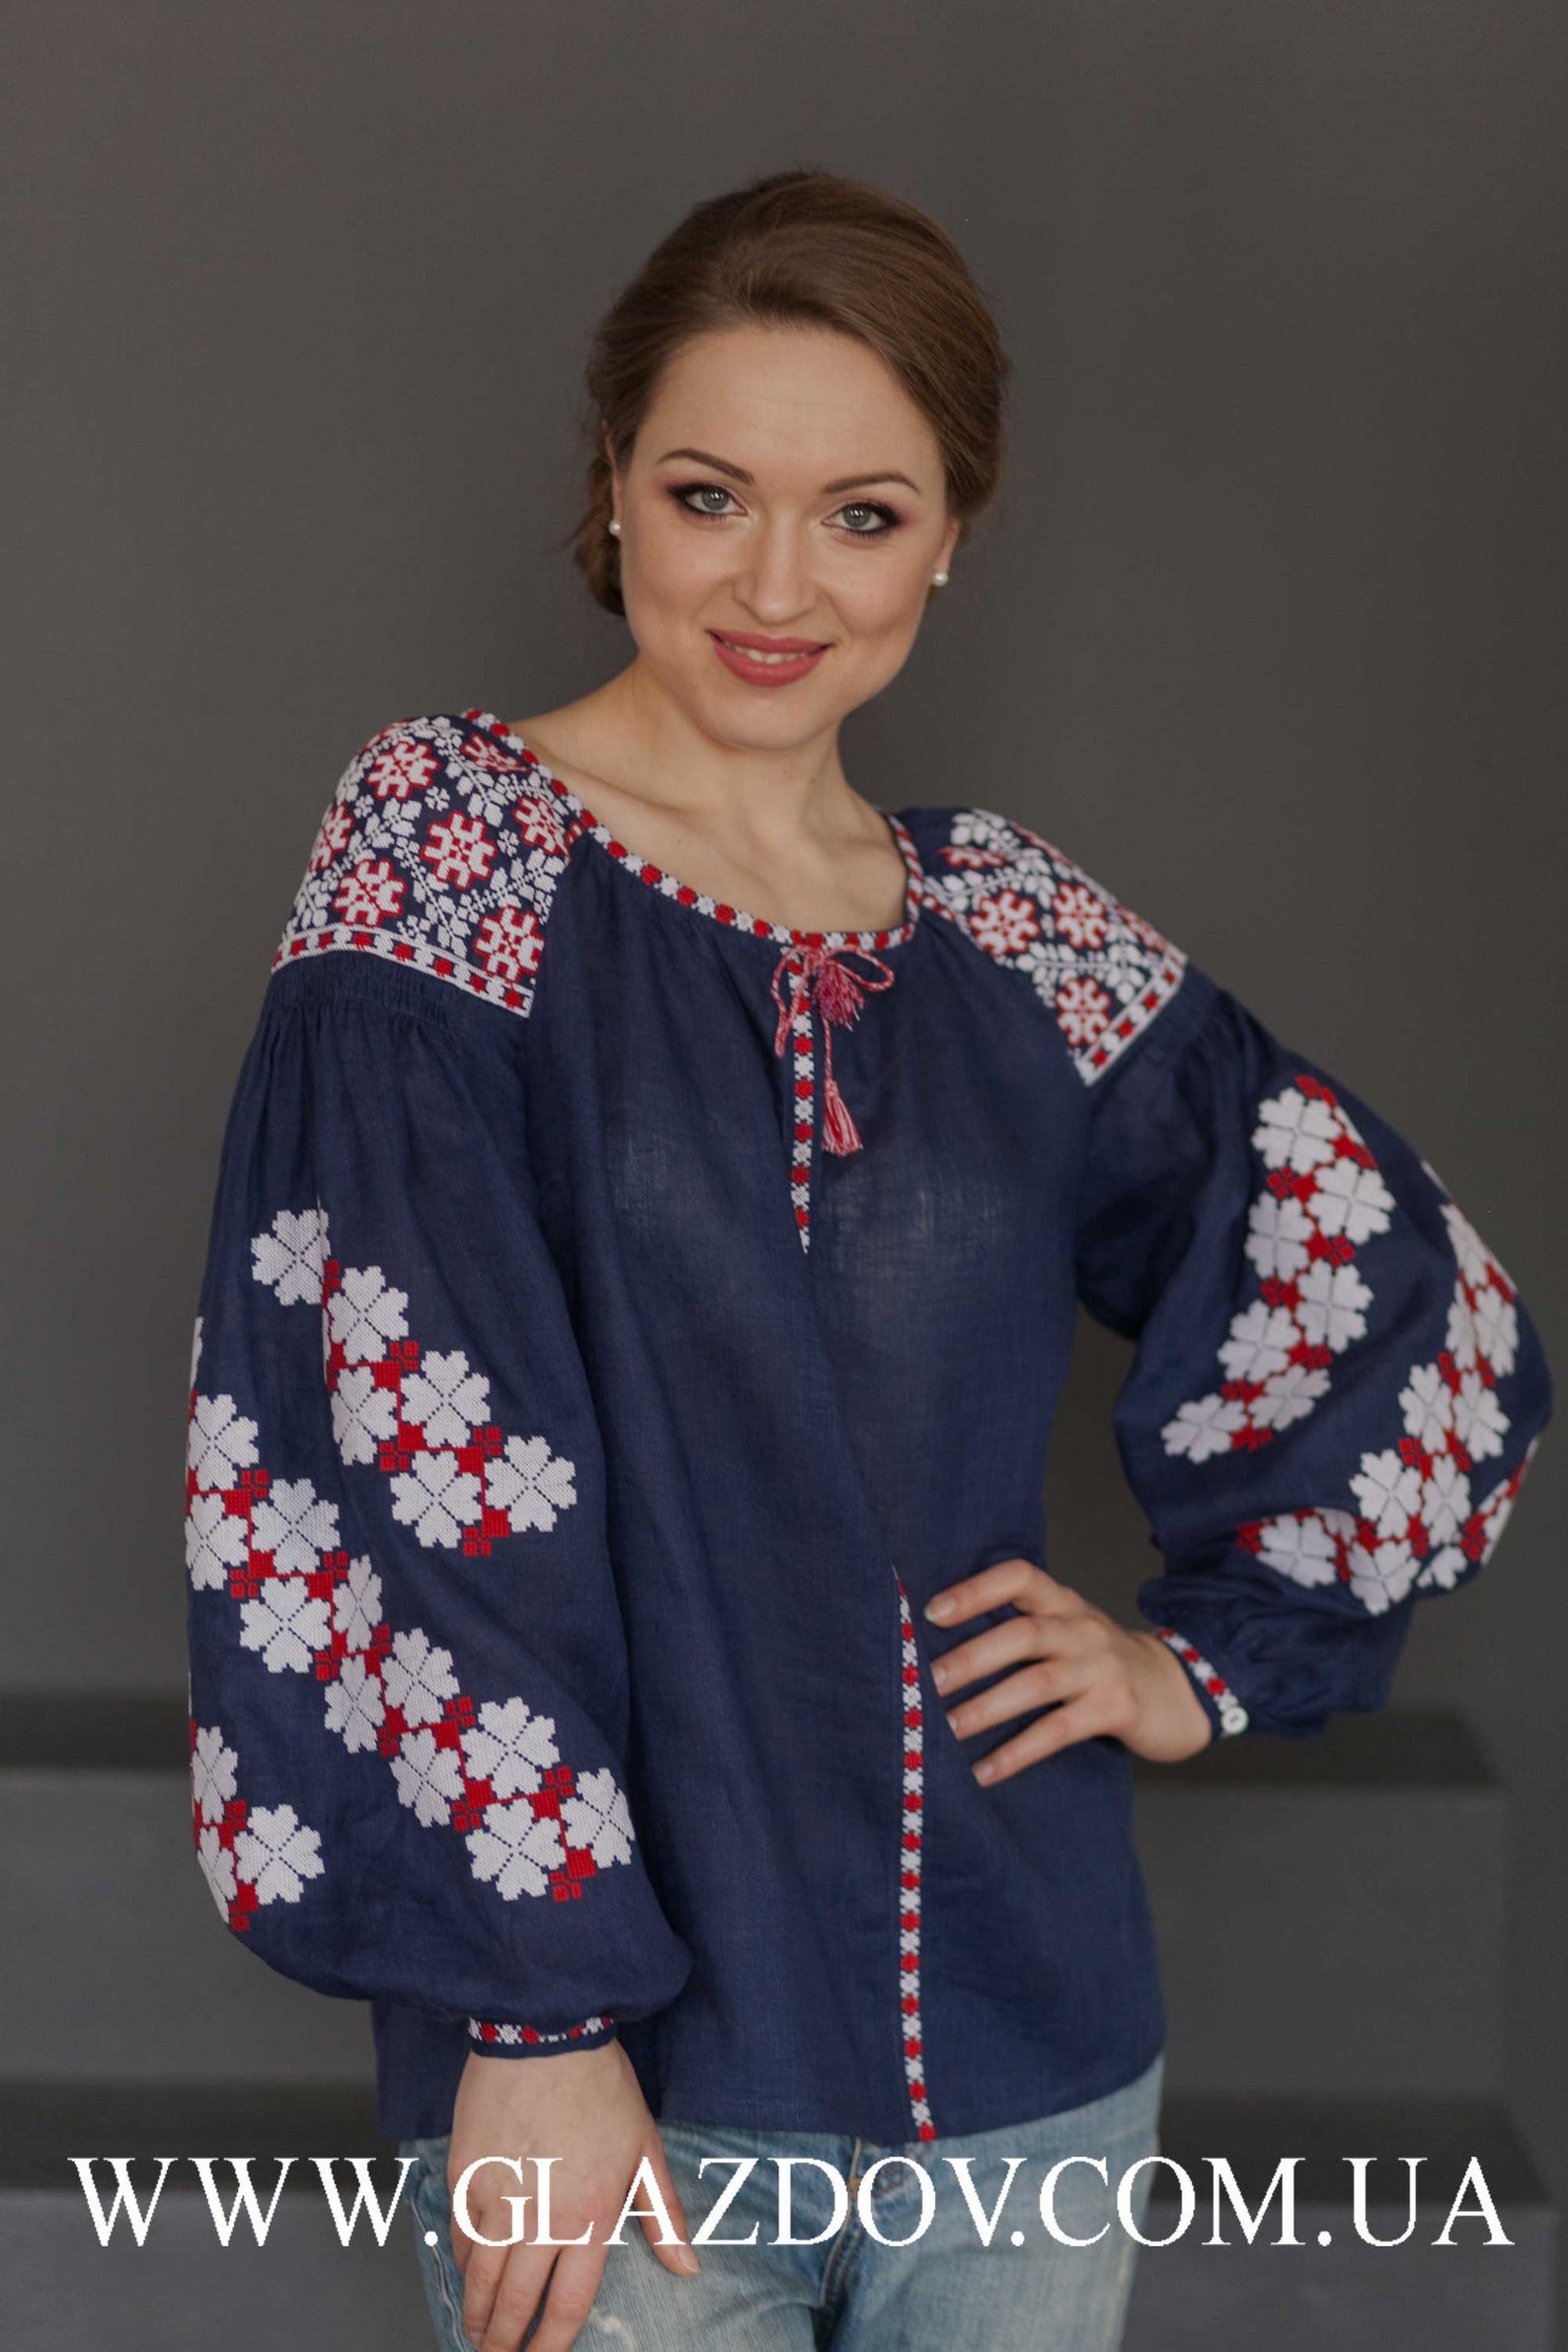 Dark Blue Embroidered Vyshyvanka With Red and White - Etsy